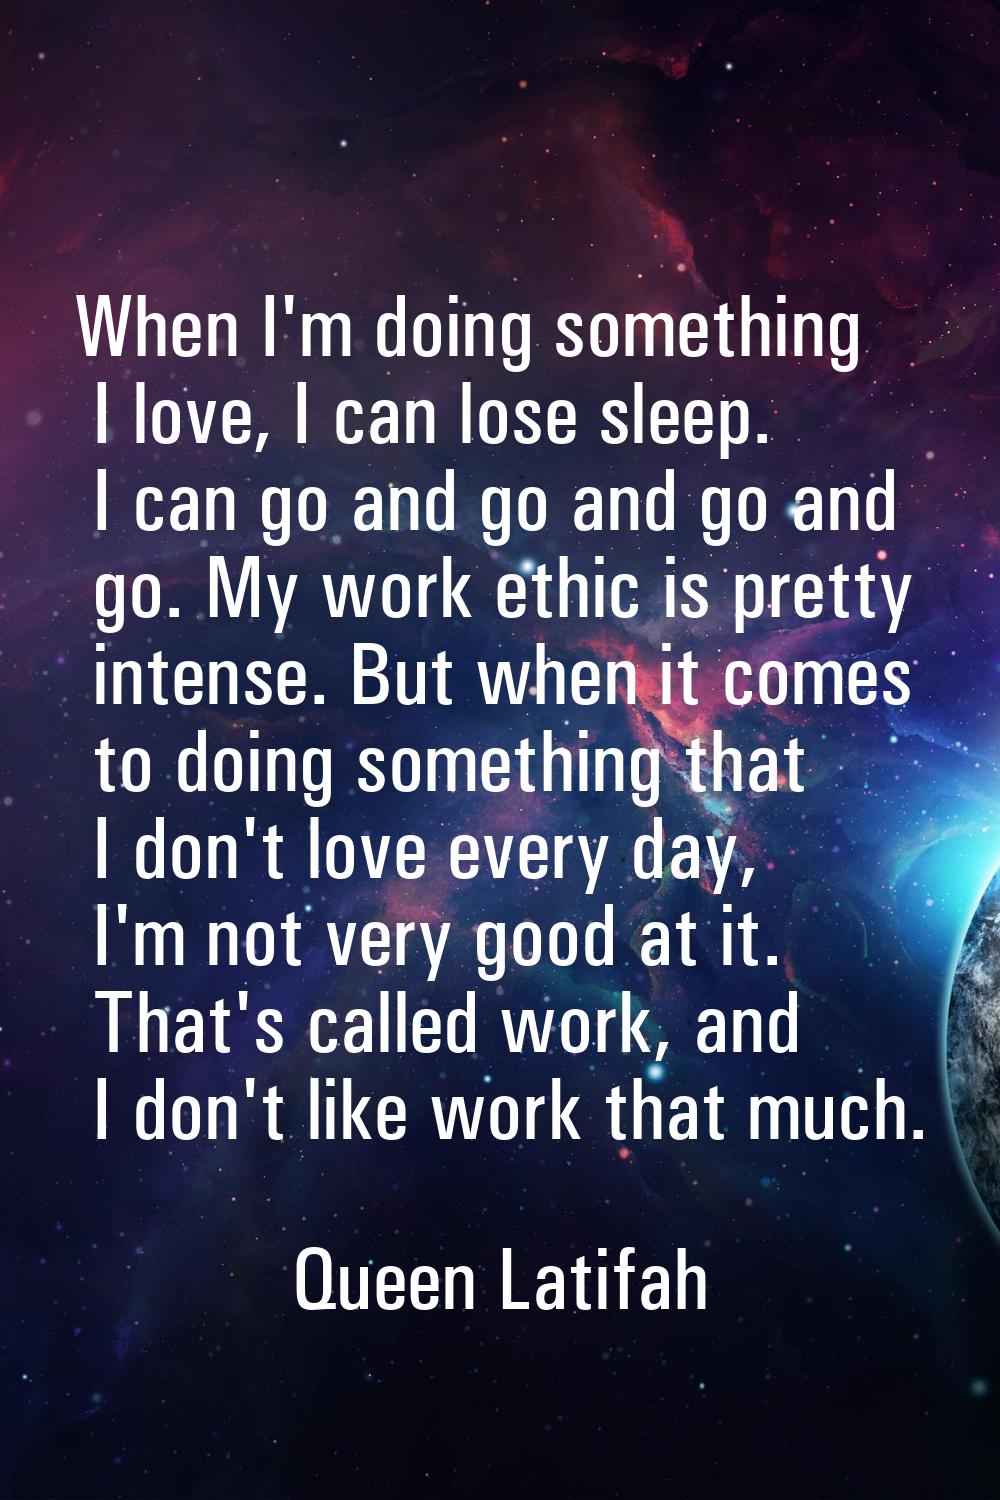 When I'm doing something I love, I can lose sleep. I can go and go and go and go. My work ethic is 